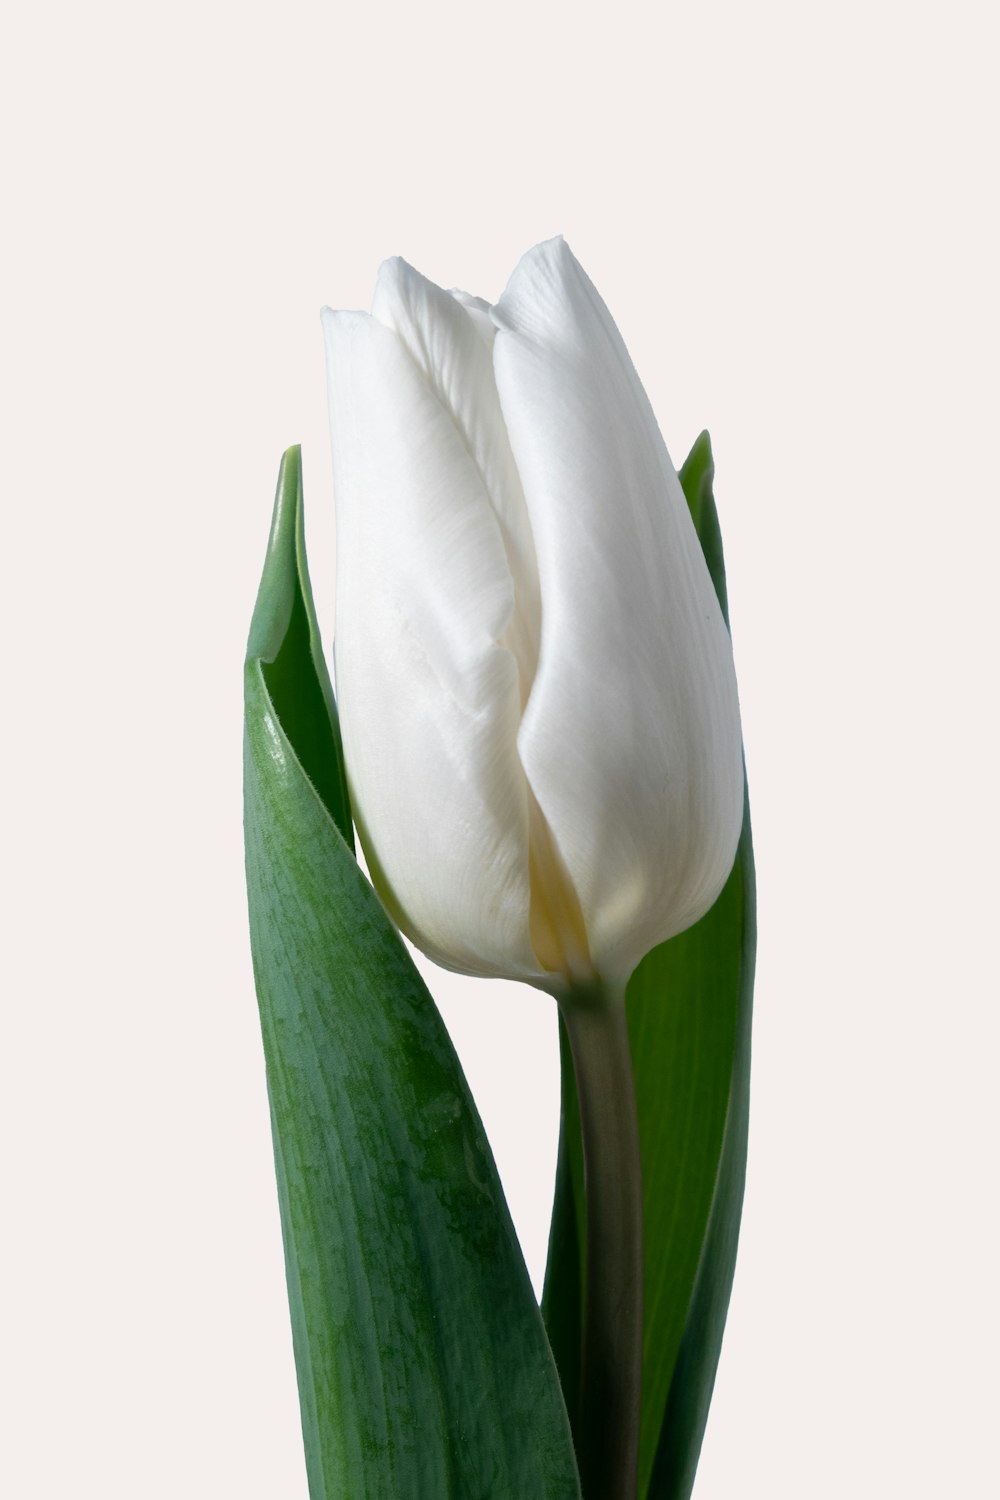 a single white tulip with a green stem